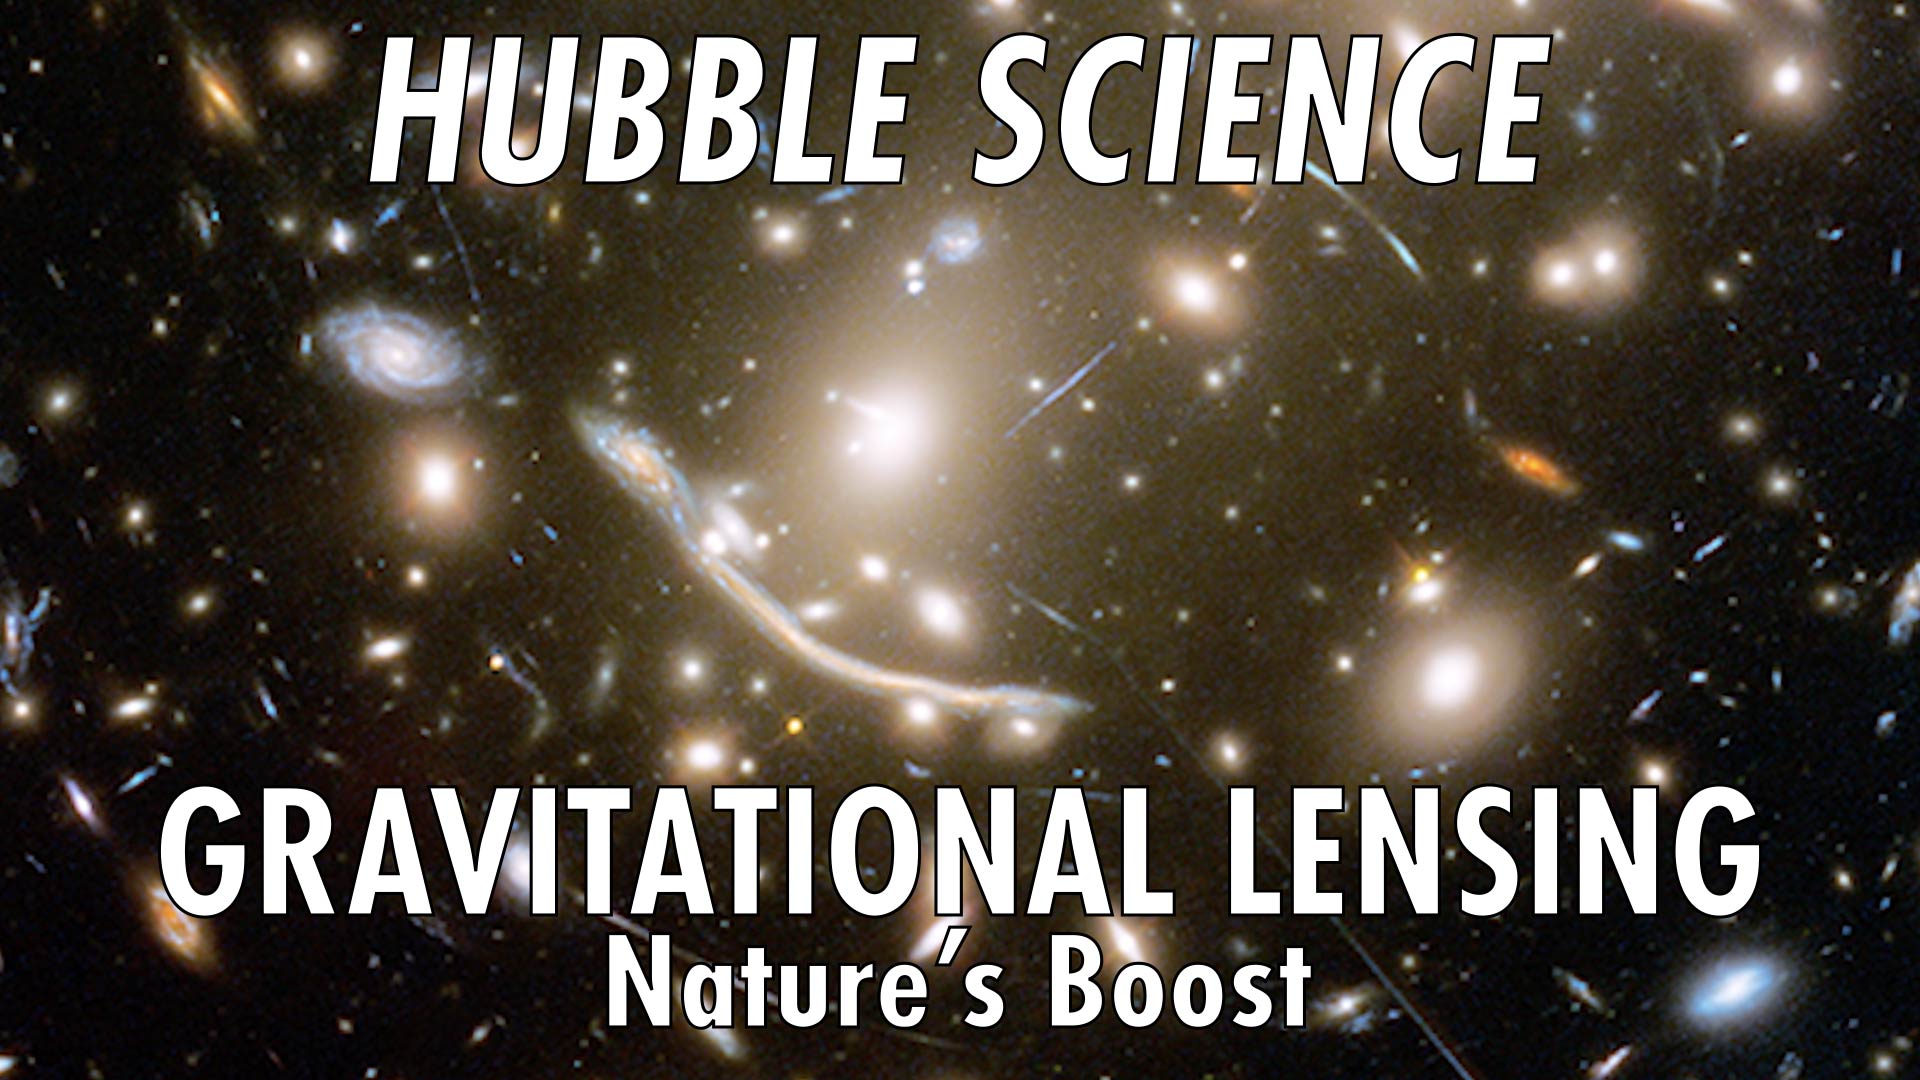 Preview Image for Hubble Science: Gravitational Lensing, Nature’s Boost